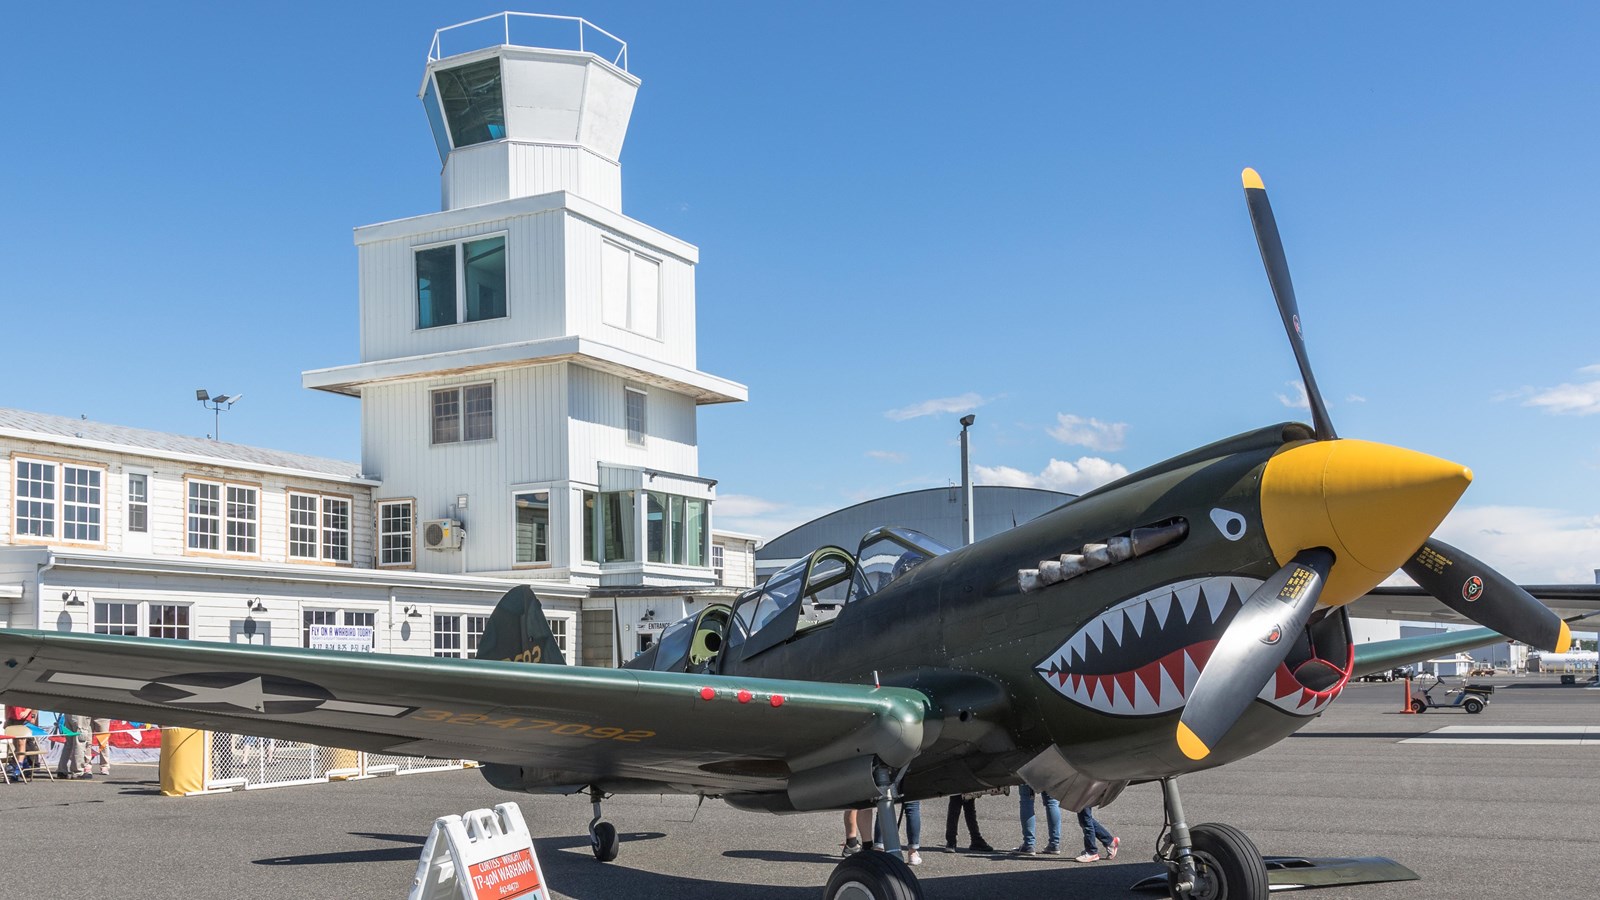 A green military plane is parked in front of a building with a 4 story square observation tower. 